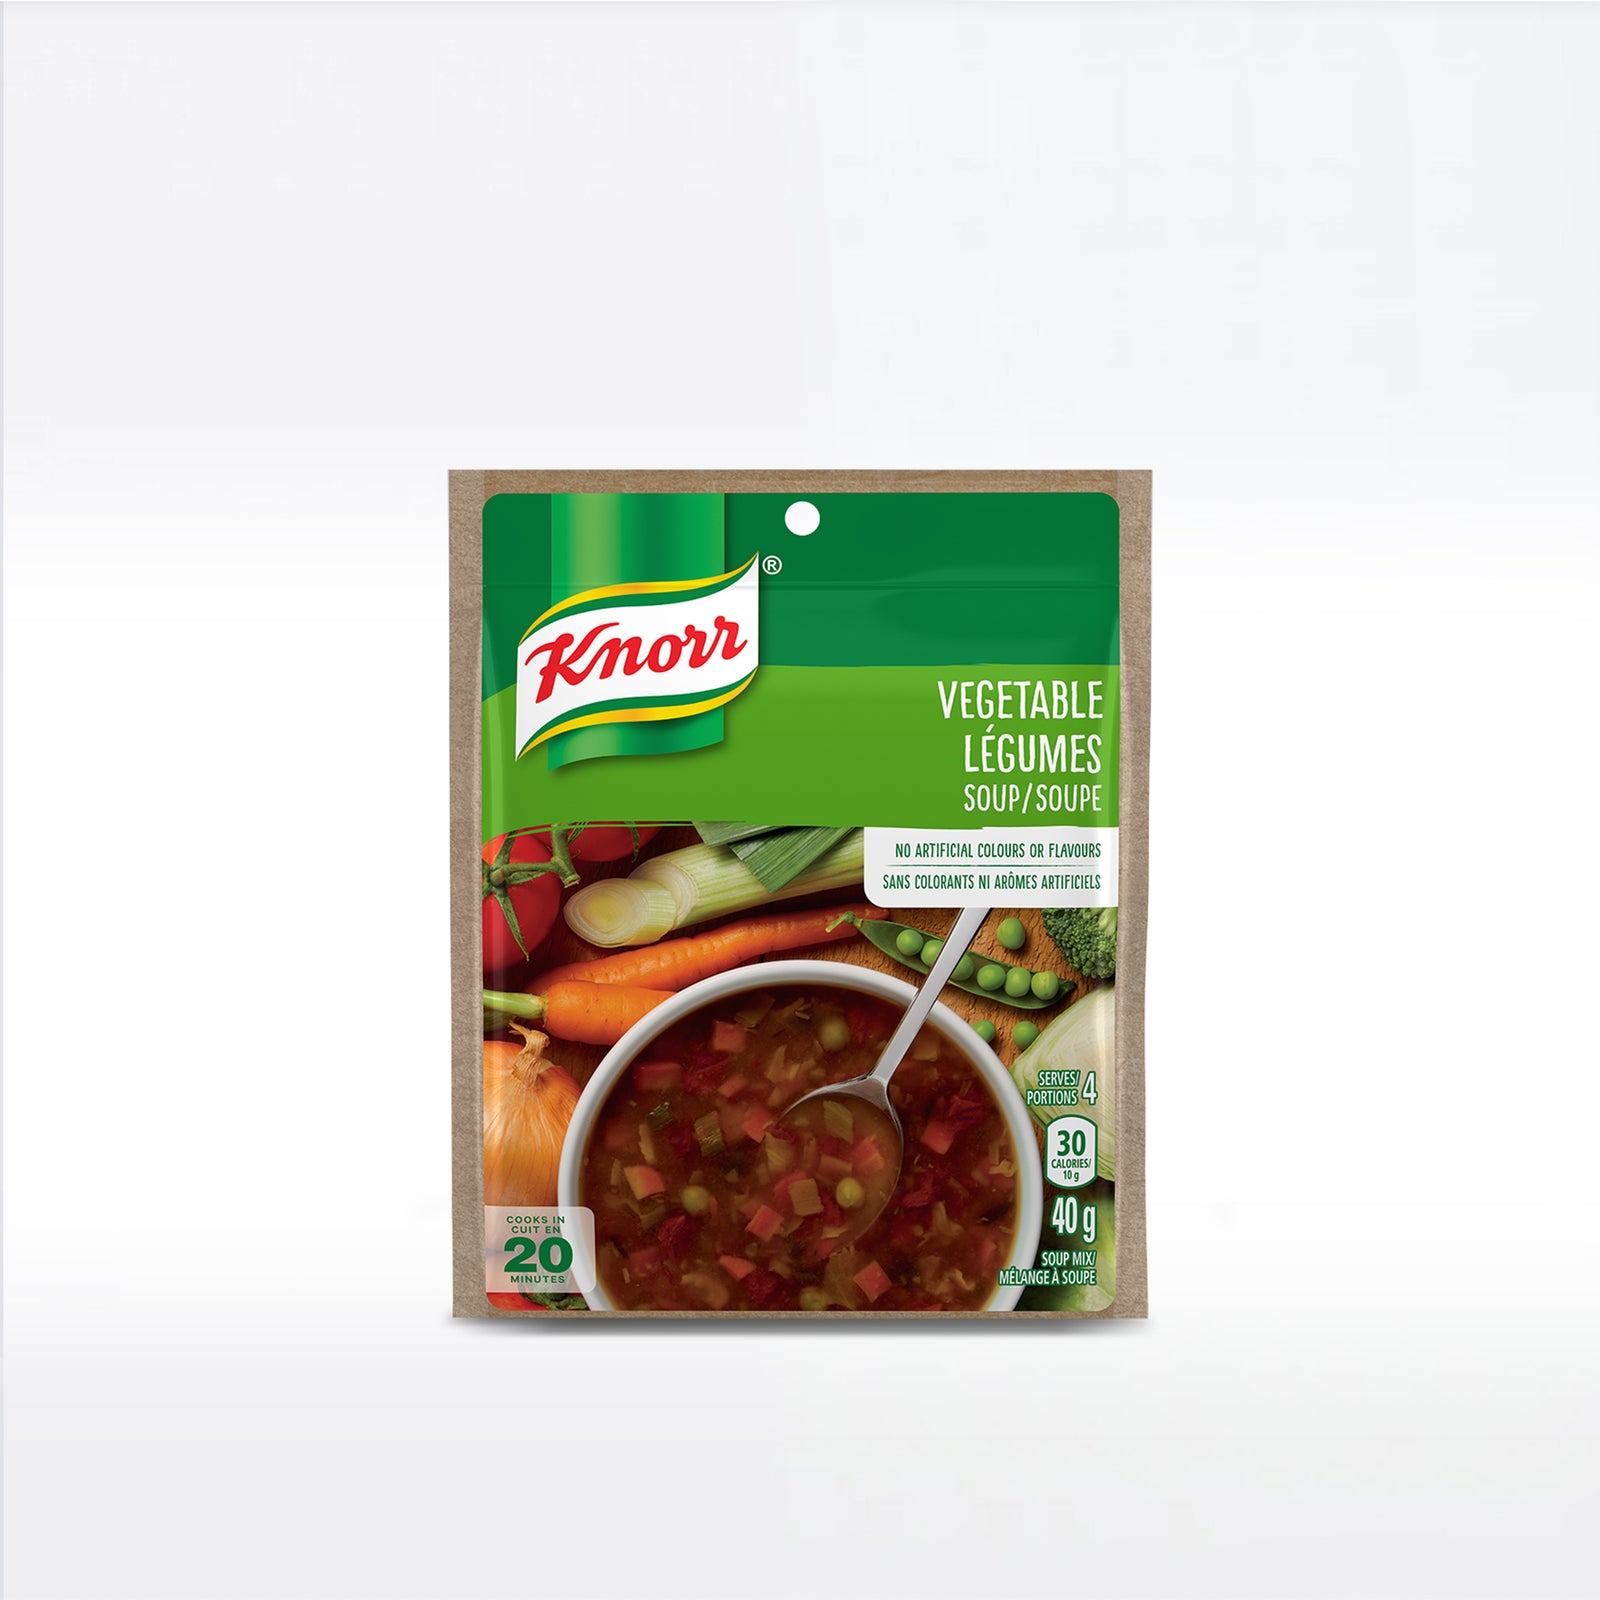 Knorr Recipe Onion Soup Mix 2 Pouches-56g, 24 count {Imported from Canada}